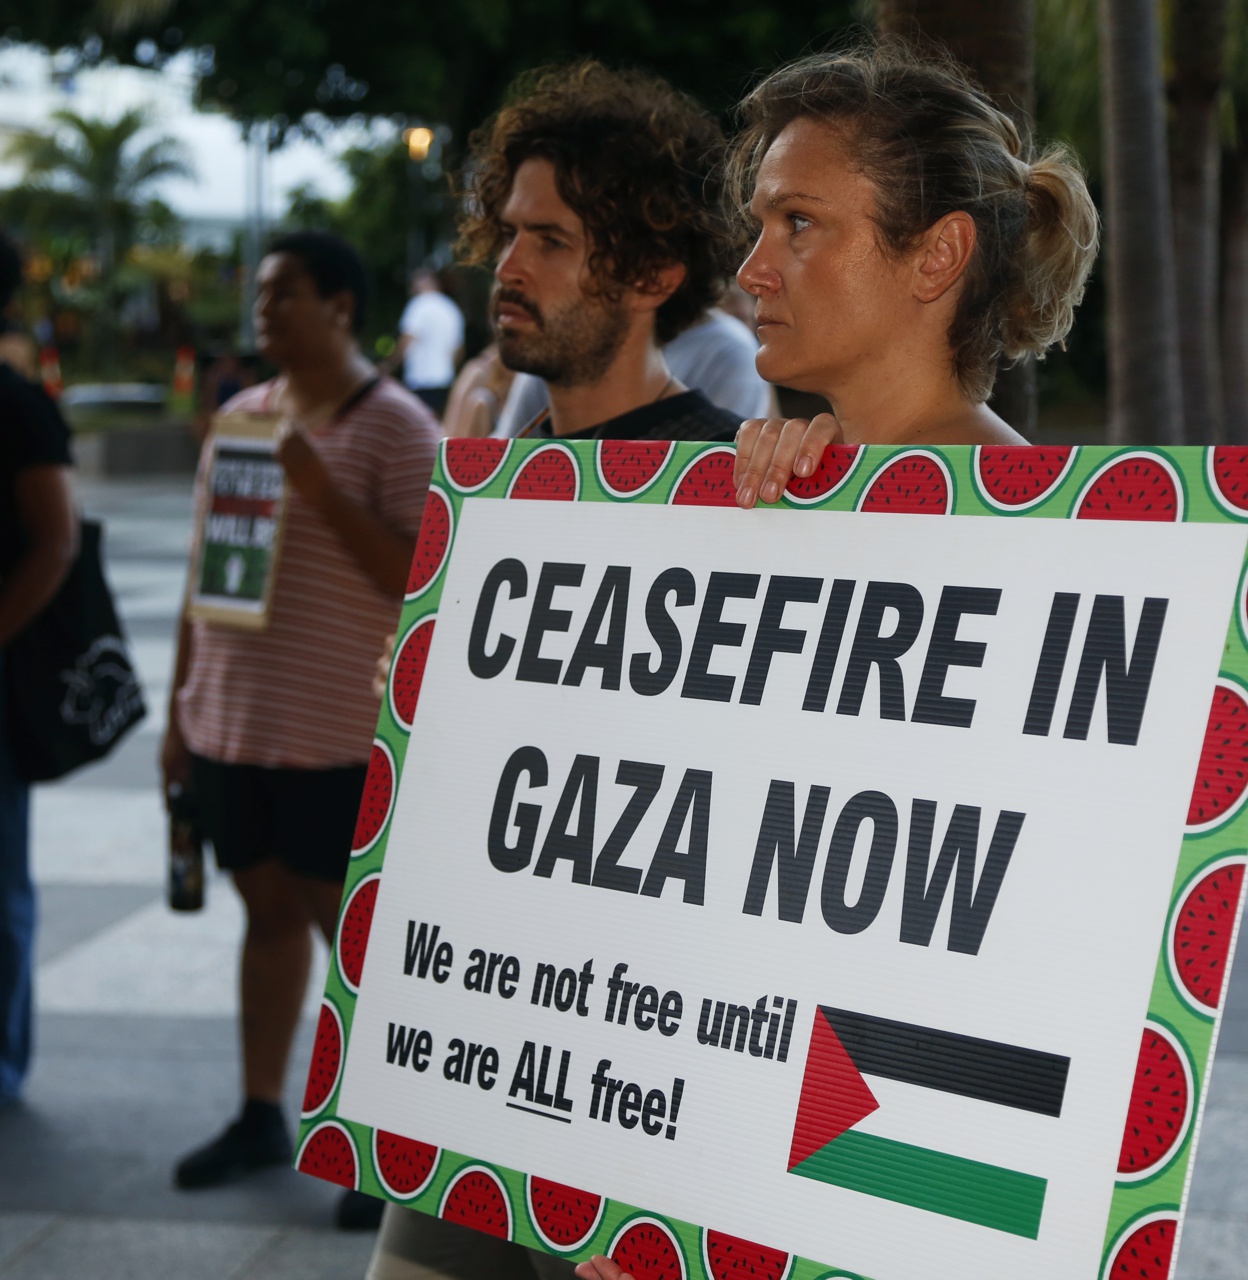 Ceasefire in Gaza now, Gimuy/Cairns